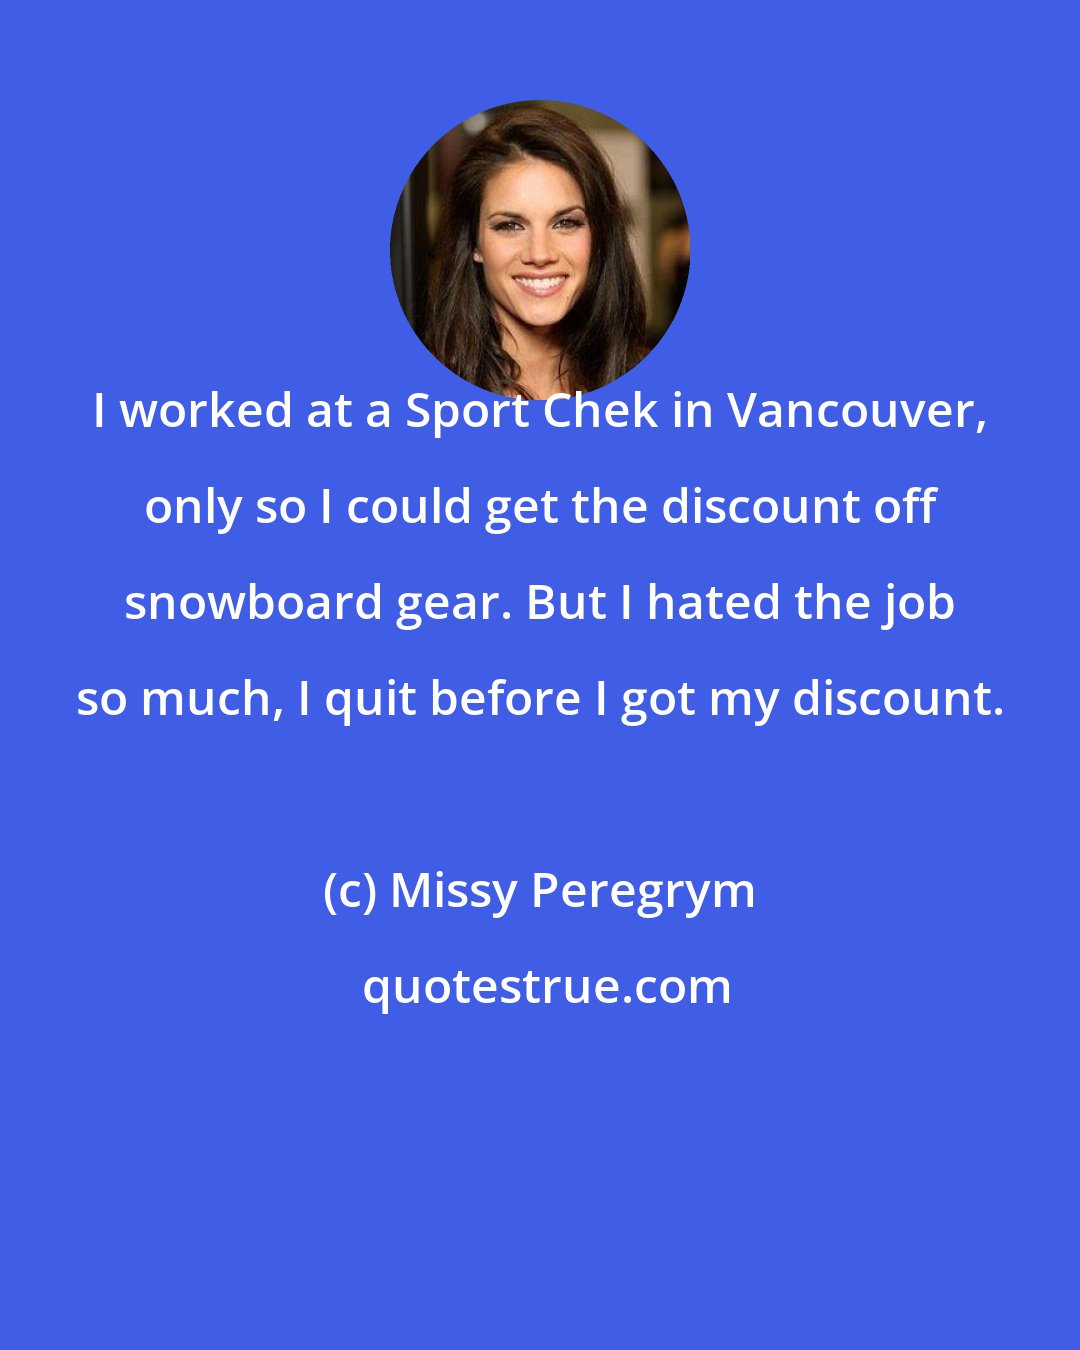 Missy Peregrym: I worked at a Sport Chek in Vancouver, only so I could get the discount off snowboard gear. But I hated the job so much, I quit before I got my discount.